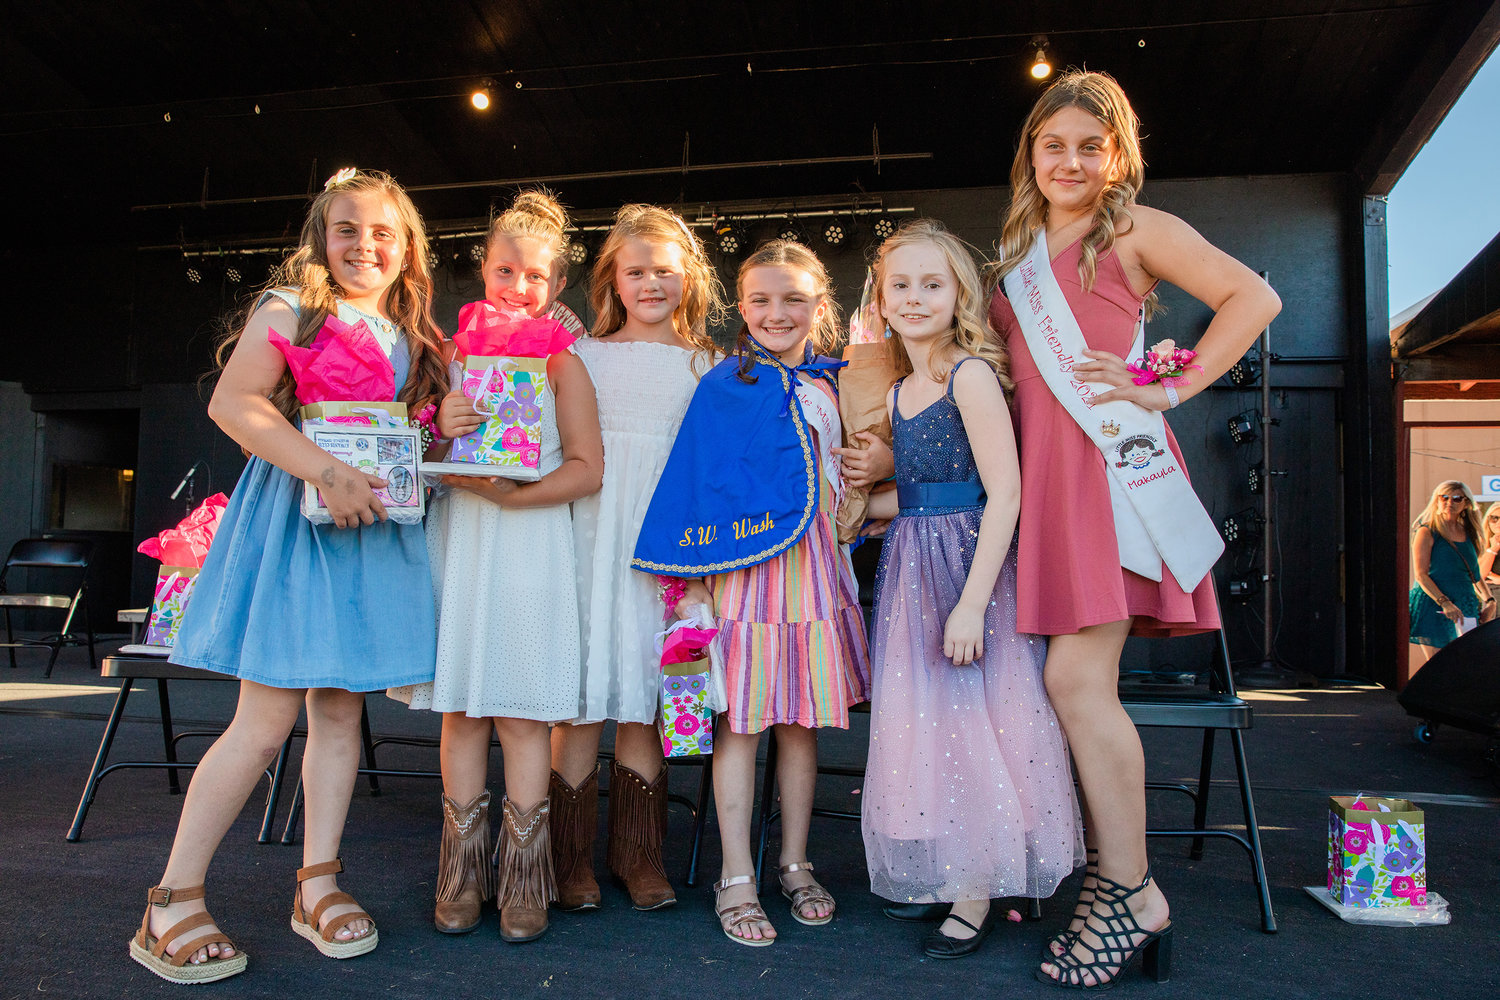 Little Miss Friendly candidates Jaxsyn Lowrey, Ella Hughes, Finley Swope and Gracelyn Briggs smile for a photo with Emma Britton, sporting the iconic cape, on the Saloon Stage at the Southwest Washington Fairgrounds in Centralia on Tuesday. Former Little Miss Friendly MaKayla Maynard is pictured far right.